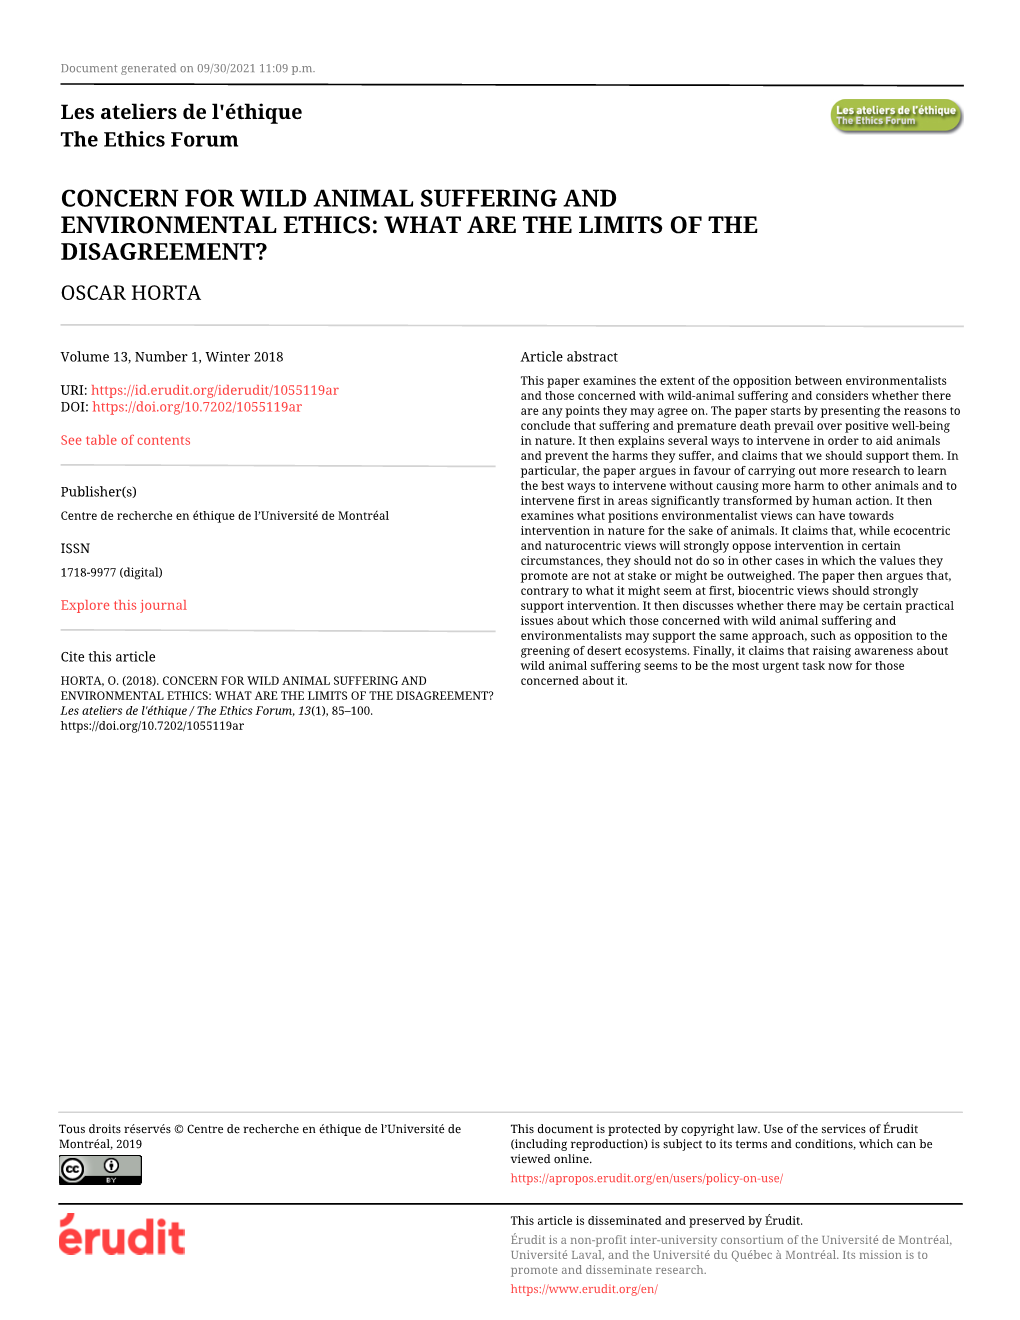 Concern for Wild Animal Suffering and Environmental Ethics: What Are the Limits of the Disagreement? Oscar Horta